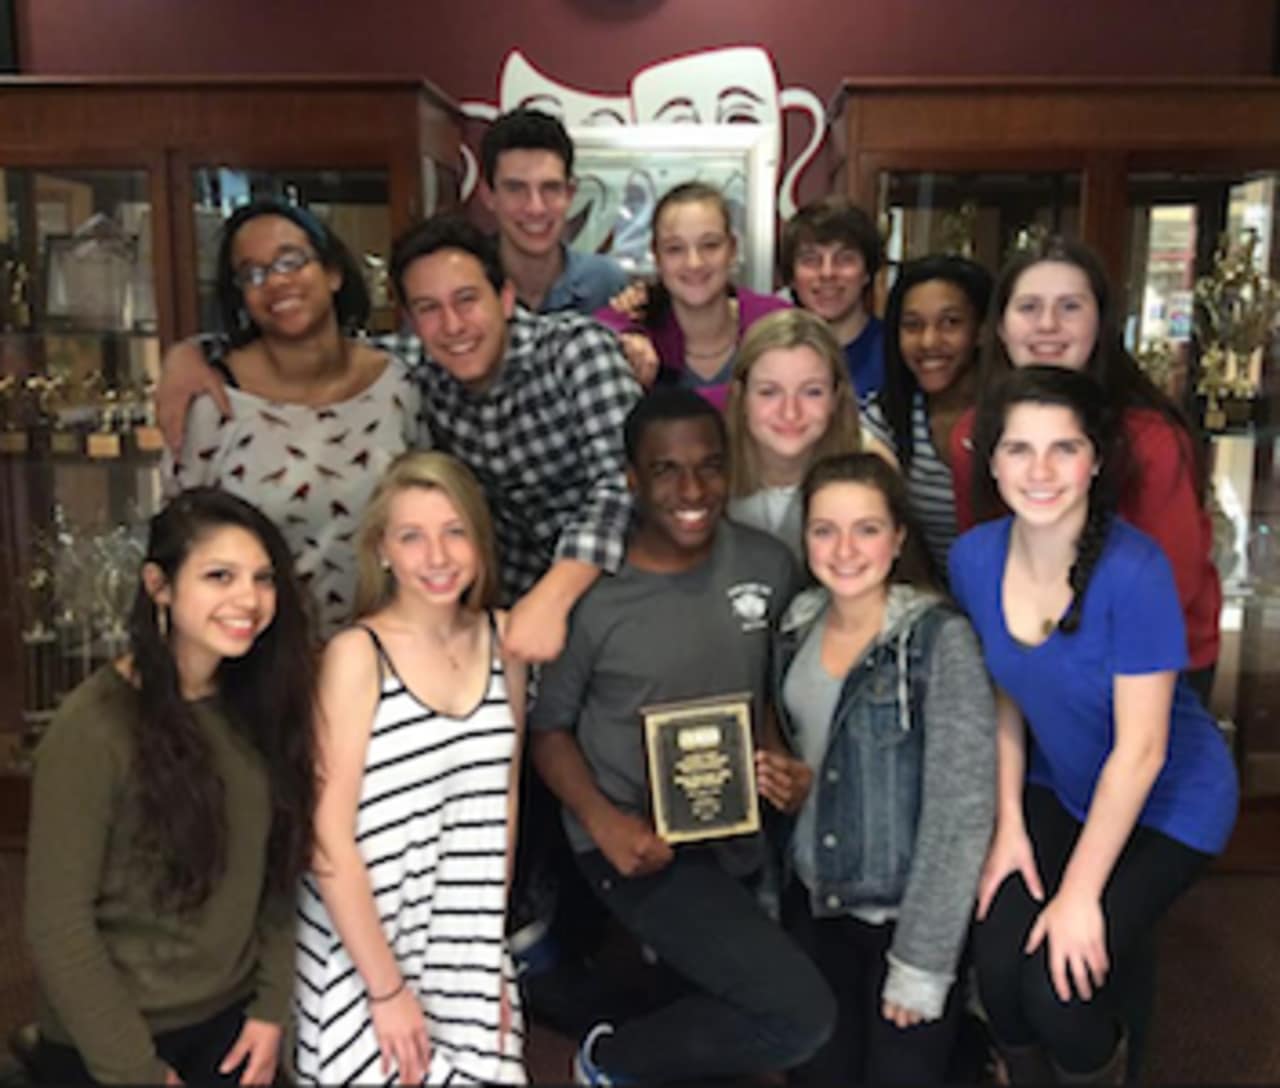 New Canaan High School Wins Award For Production of the "The Apple Tree."